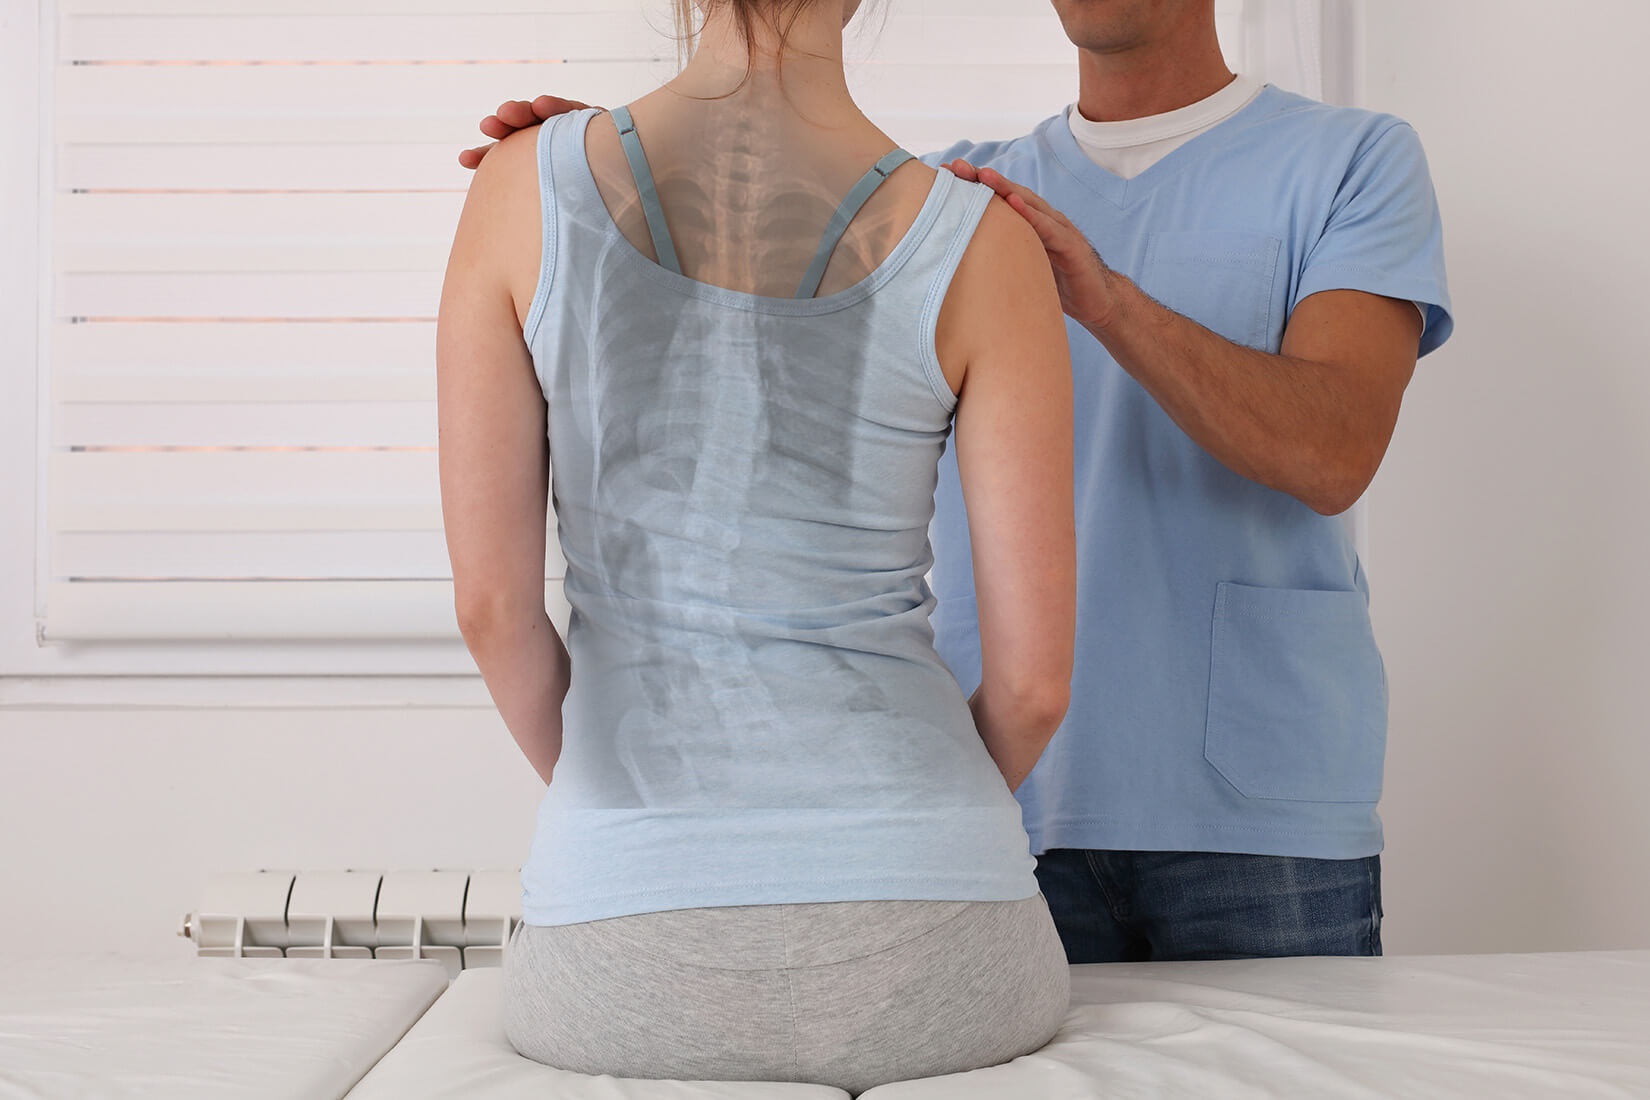 scoliosis and chiropractic treatment